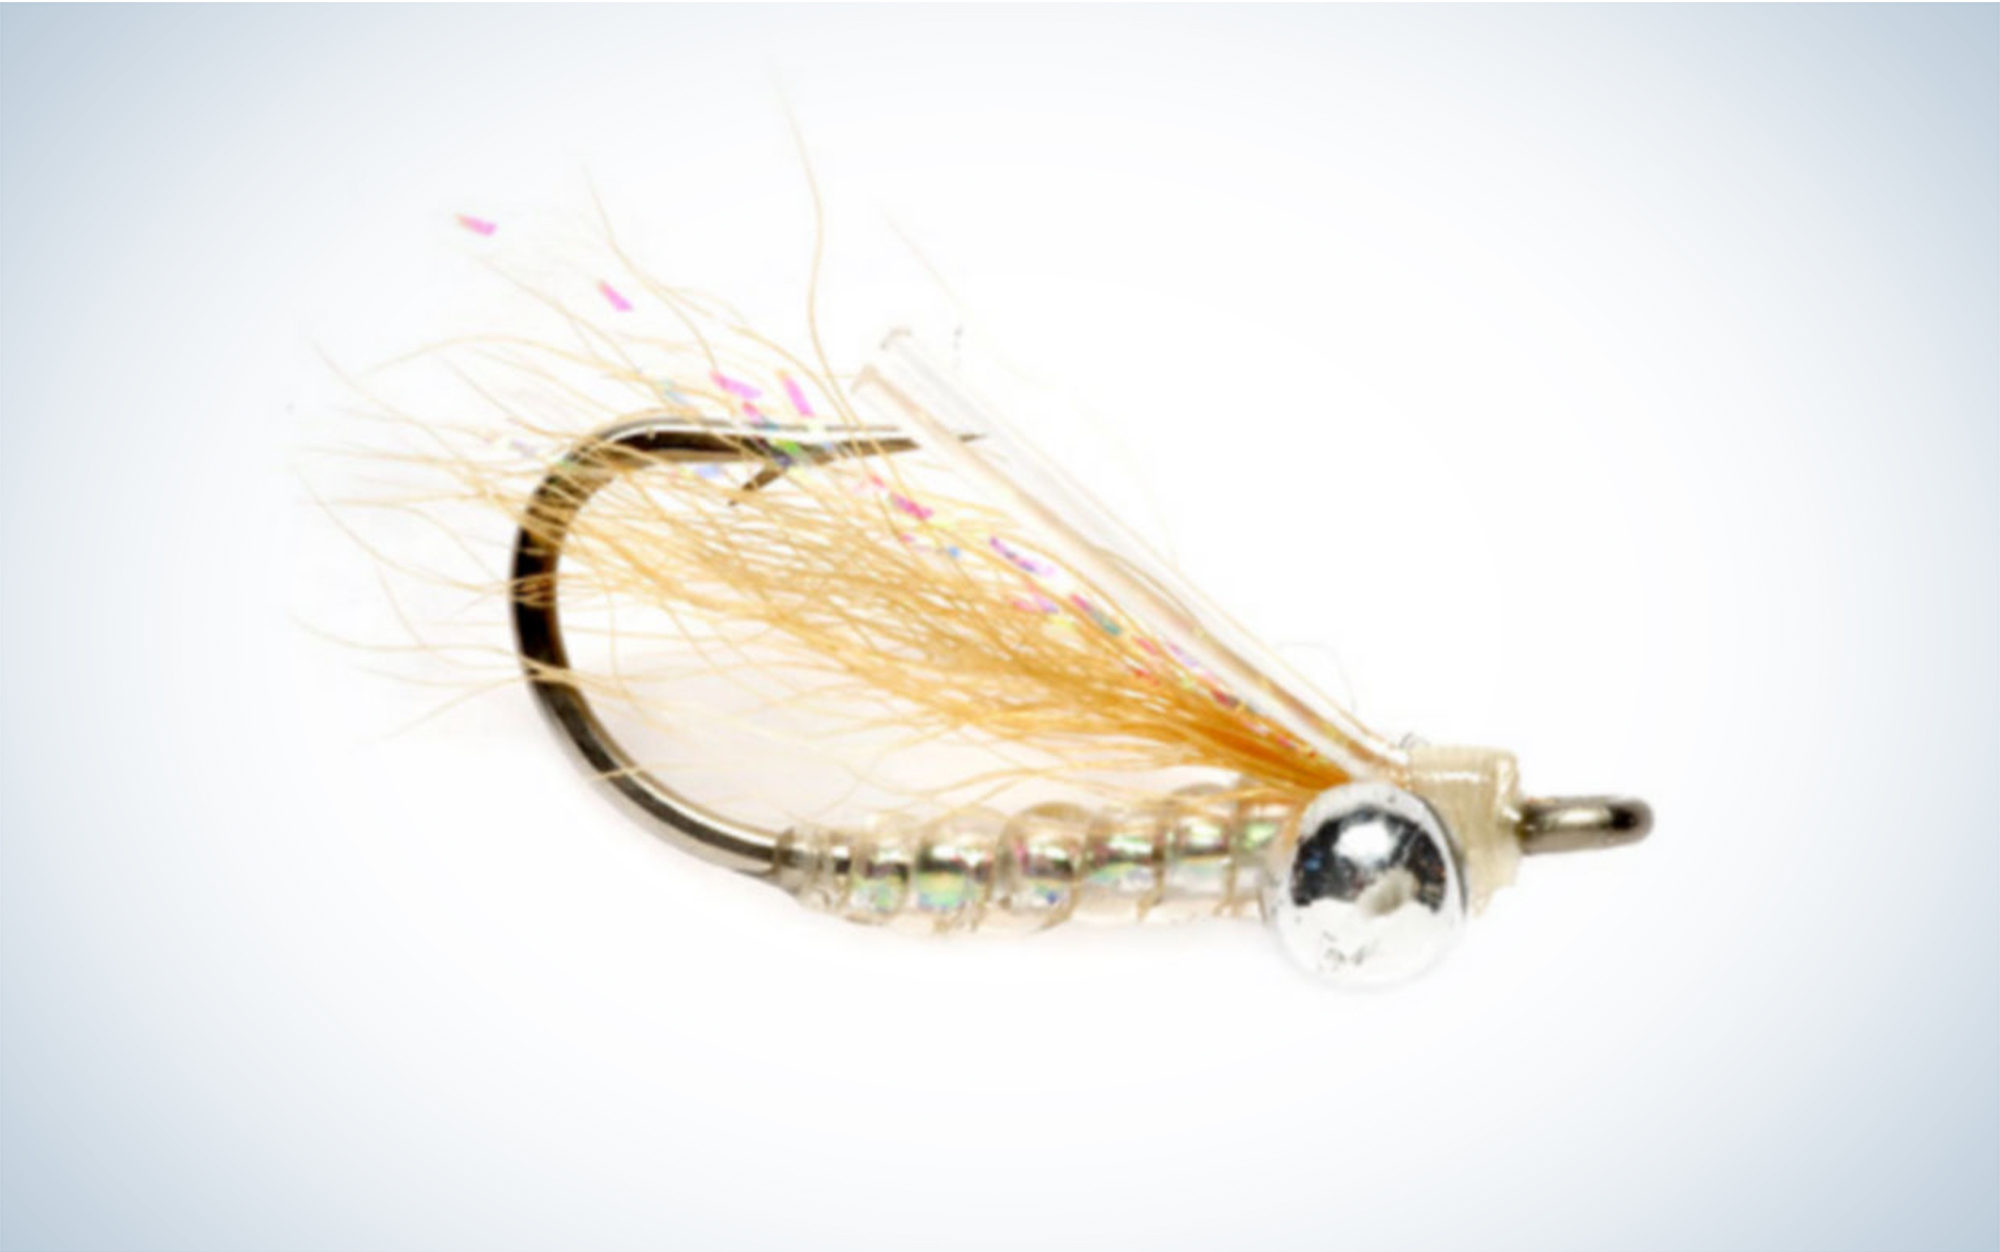 The Crazy Charlie Saltwater Fly Fishing Flies is one of the best flies for carp.